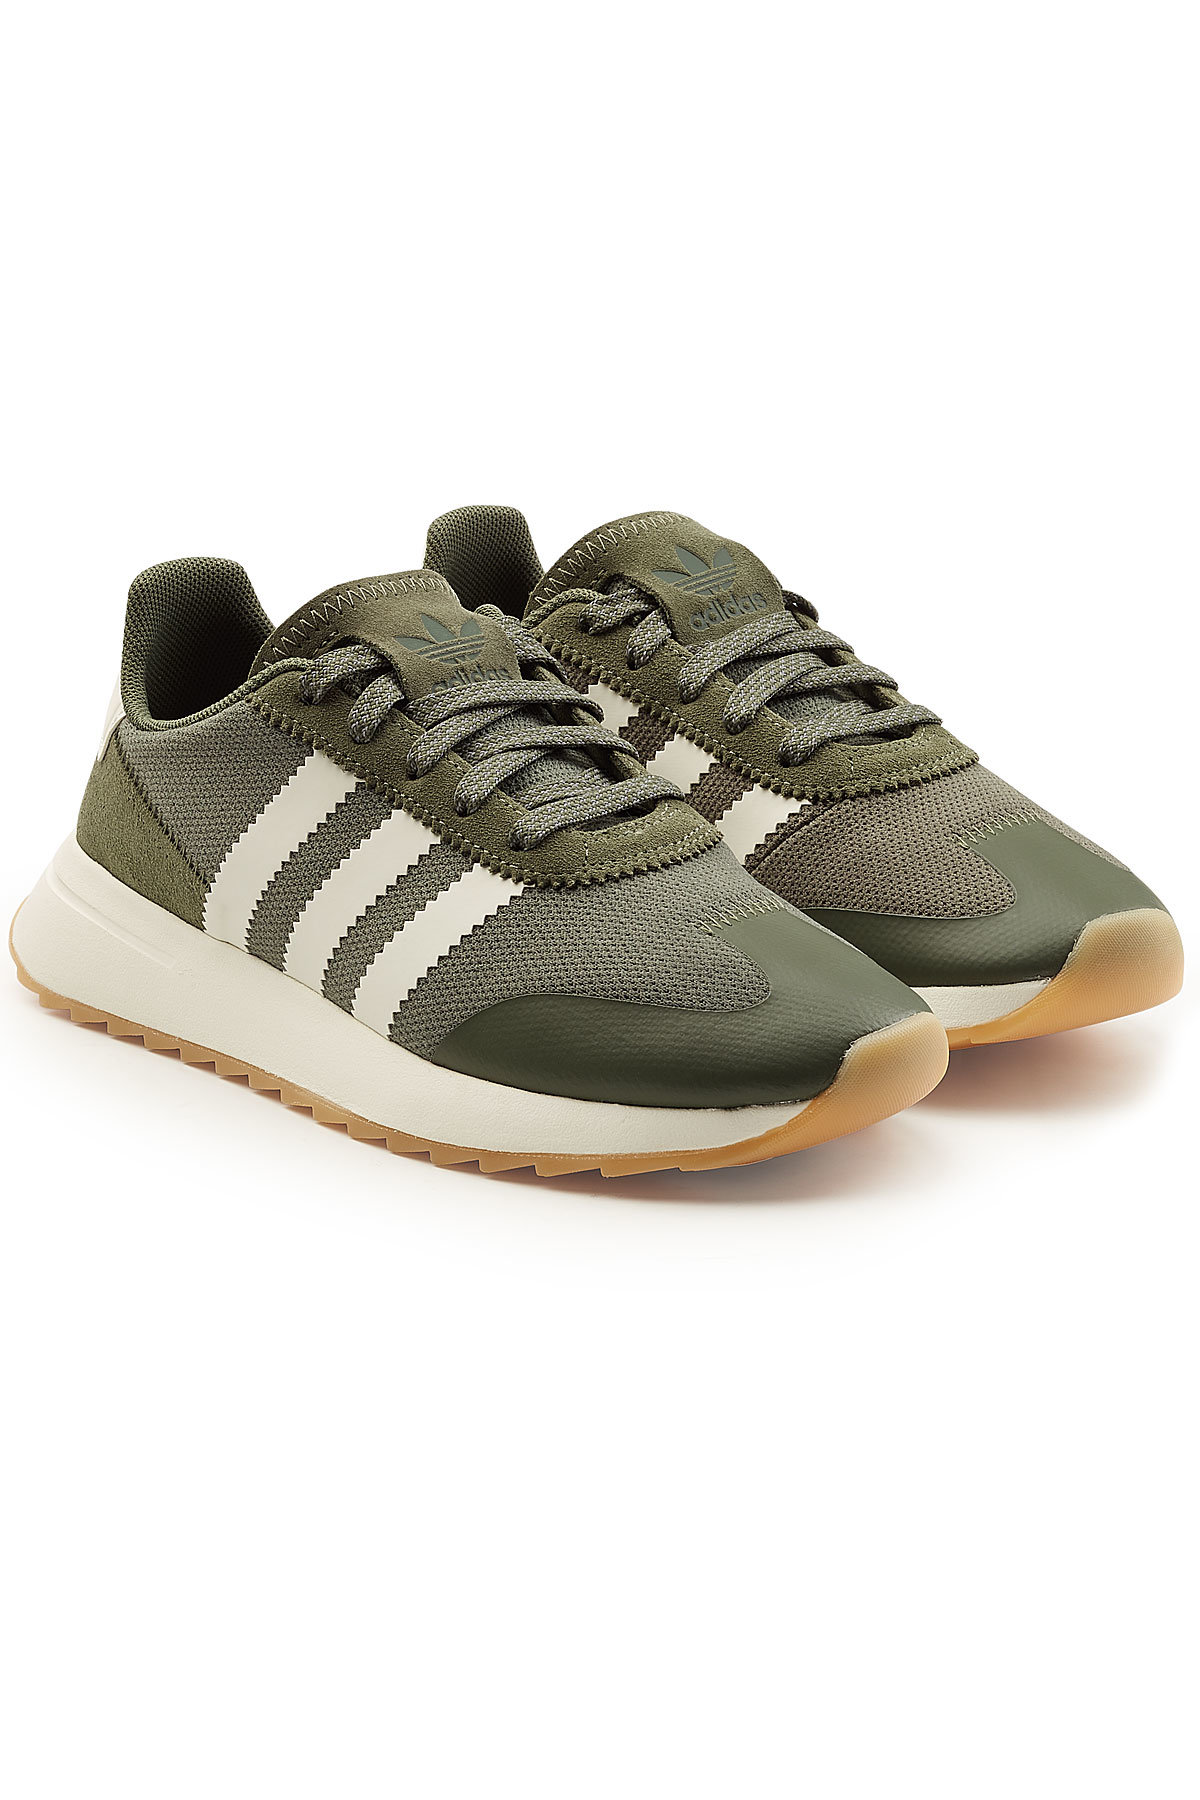 FLB Sneakers with Leather and Mesh by Adidas Originals